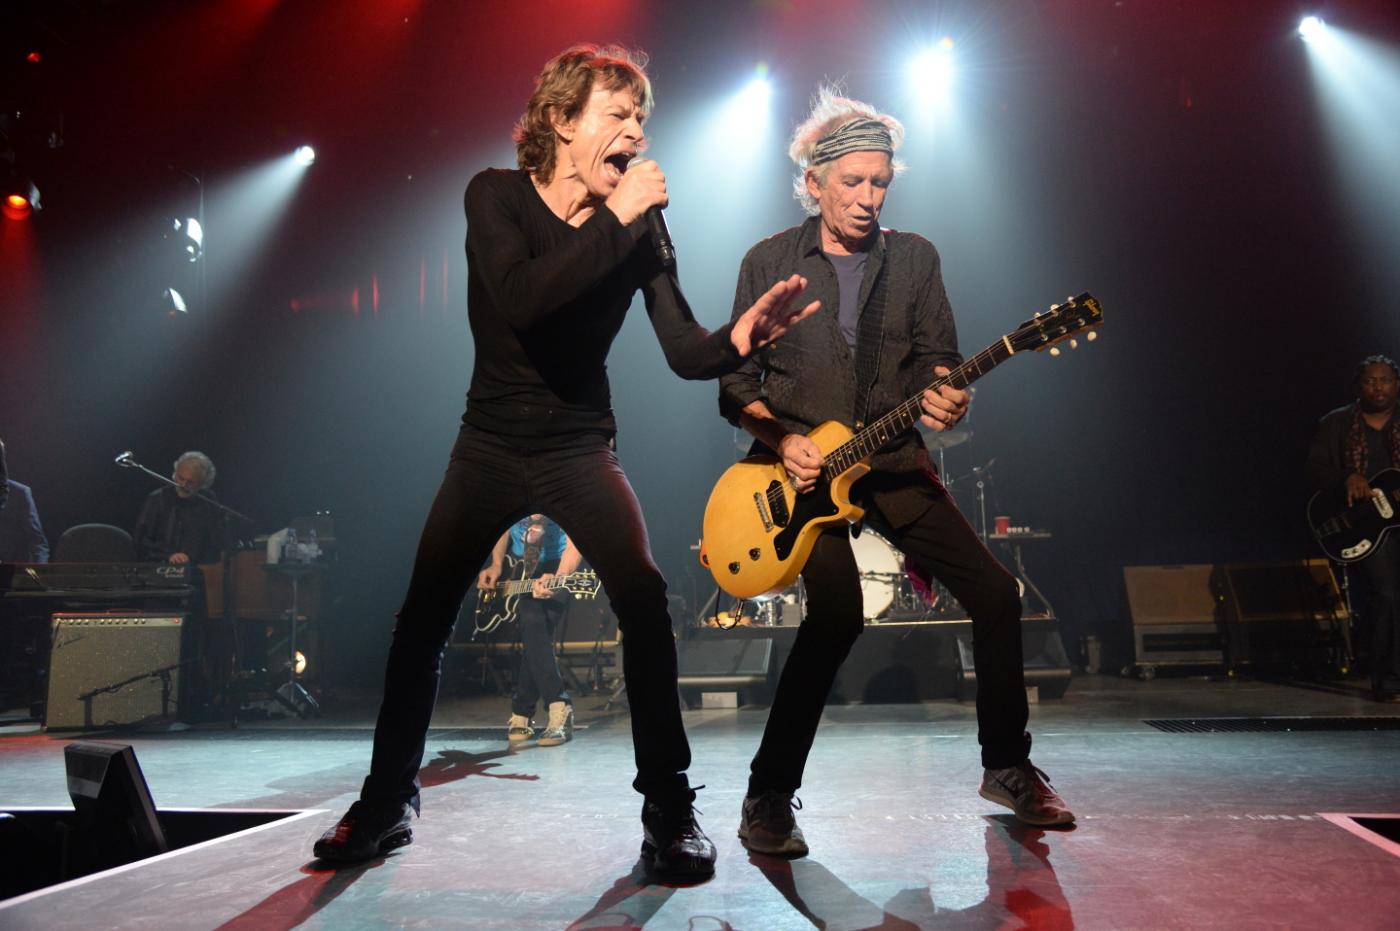 Mick Jagger and Keith Richards performing Sticky Fingers at the Fonda Theatre in 2015. Photo: Kevin Mazur